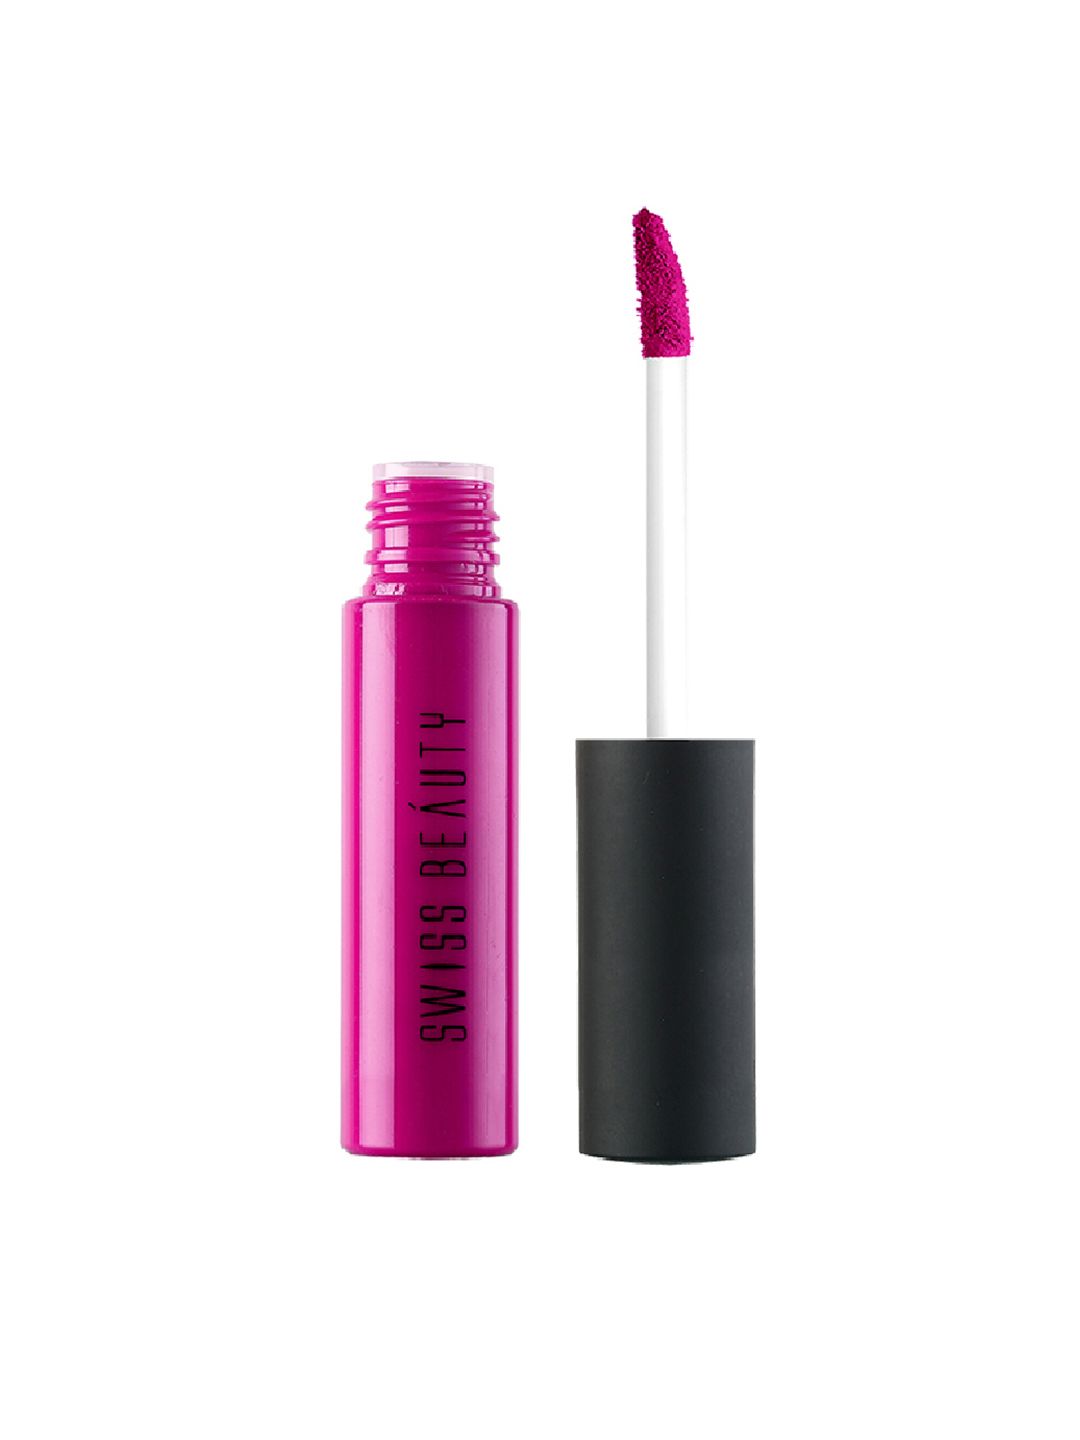 SWISS BEAUTY Soft Matte Liquid Lipstick - Candy Pink 26 Price in India